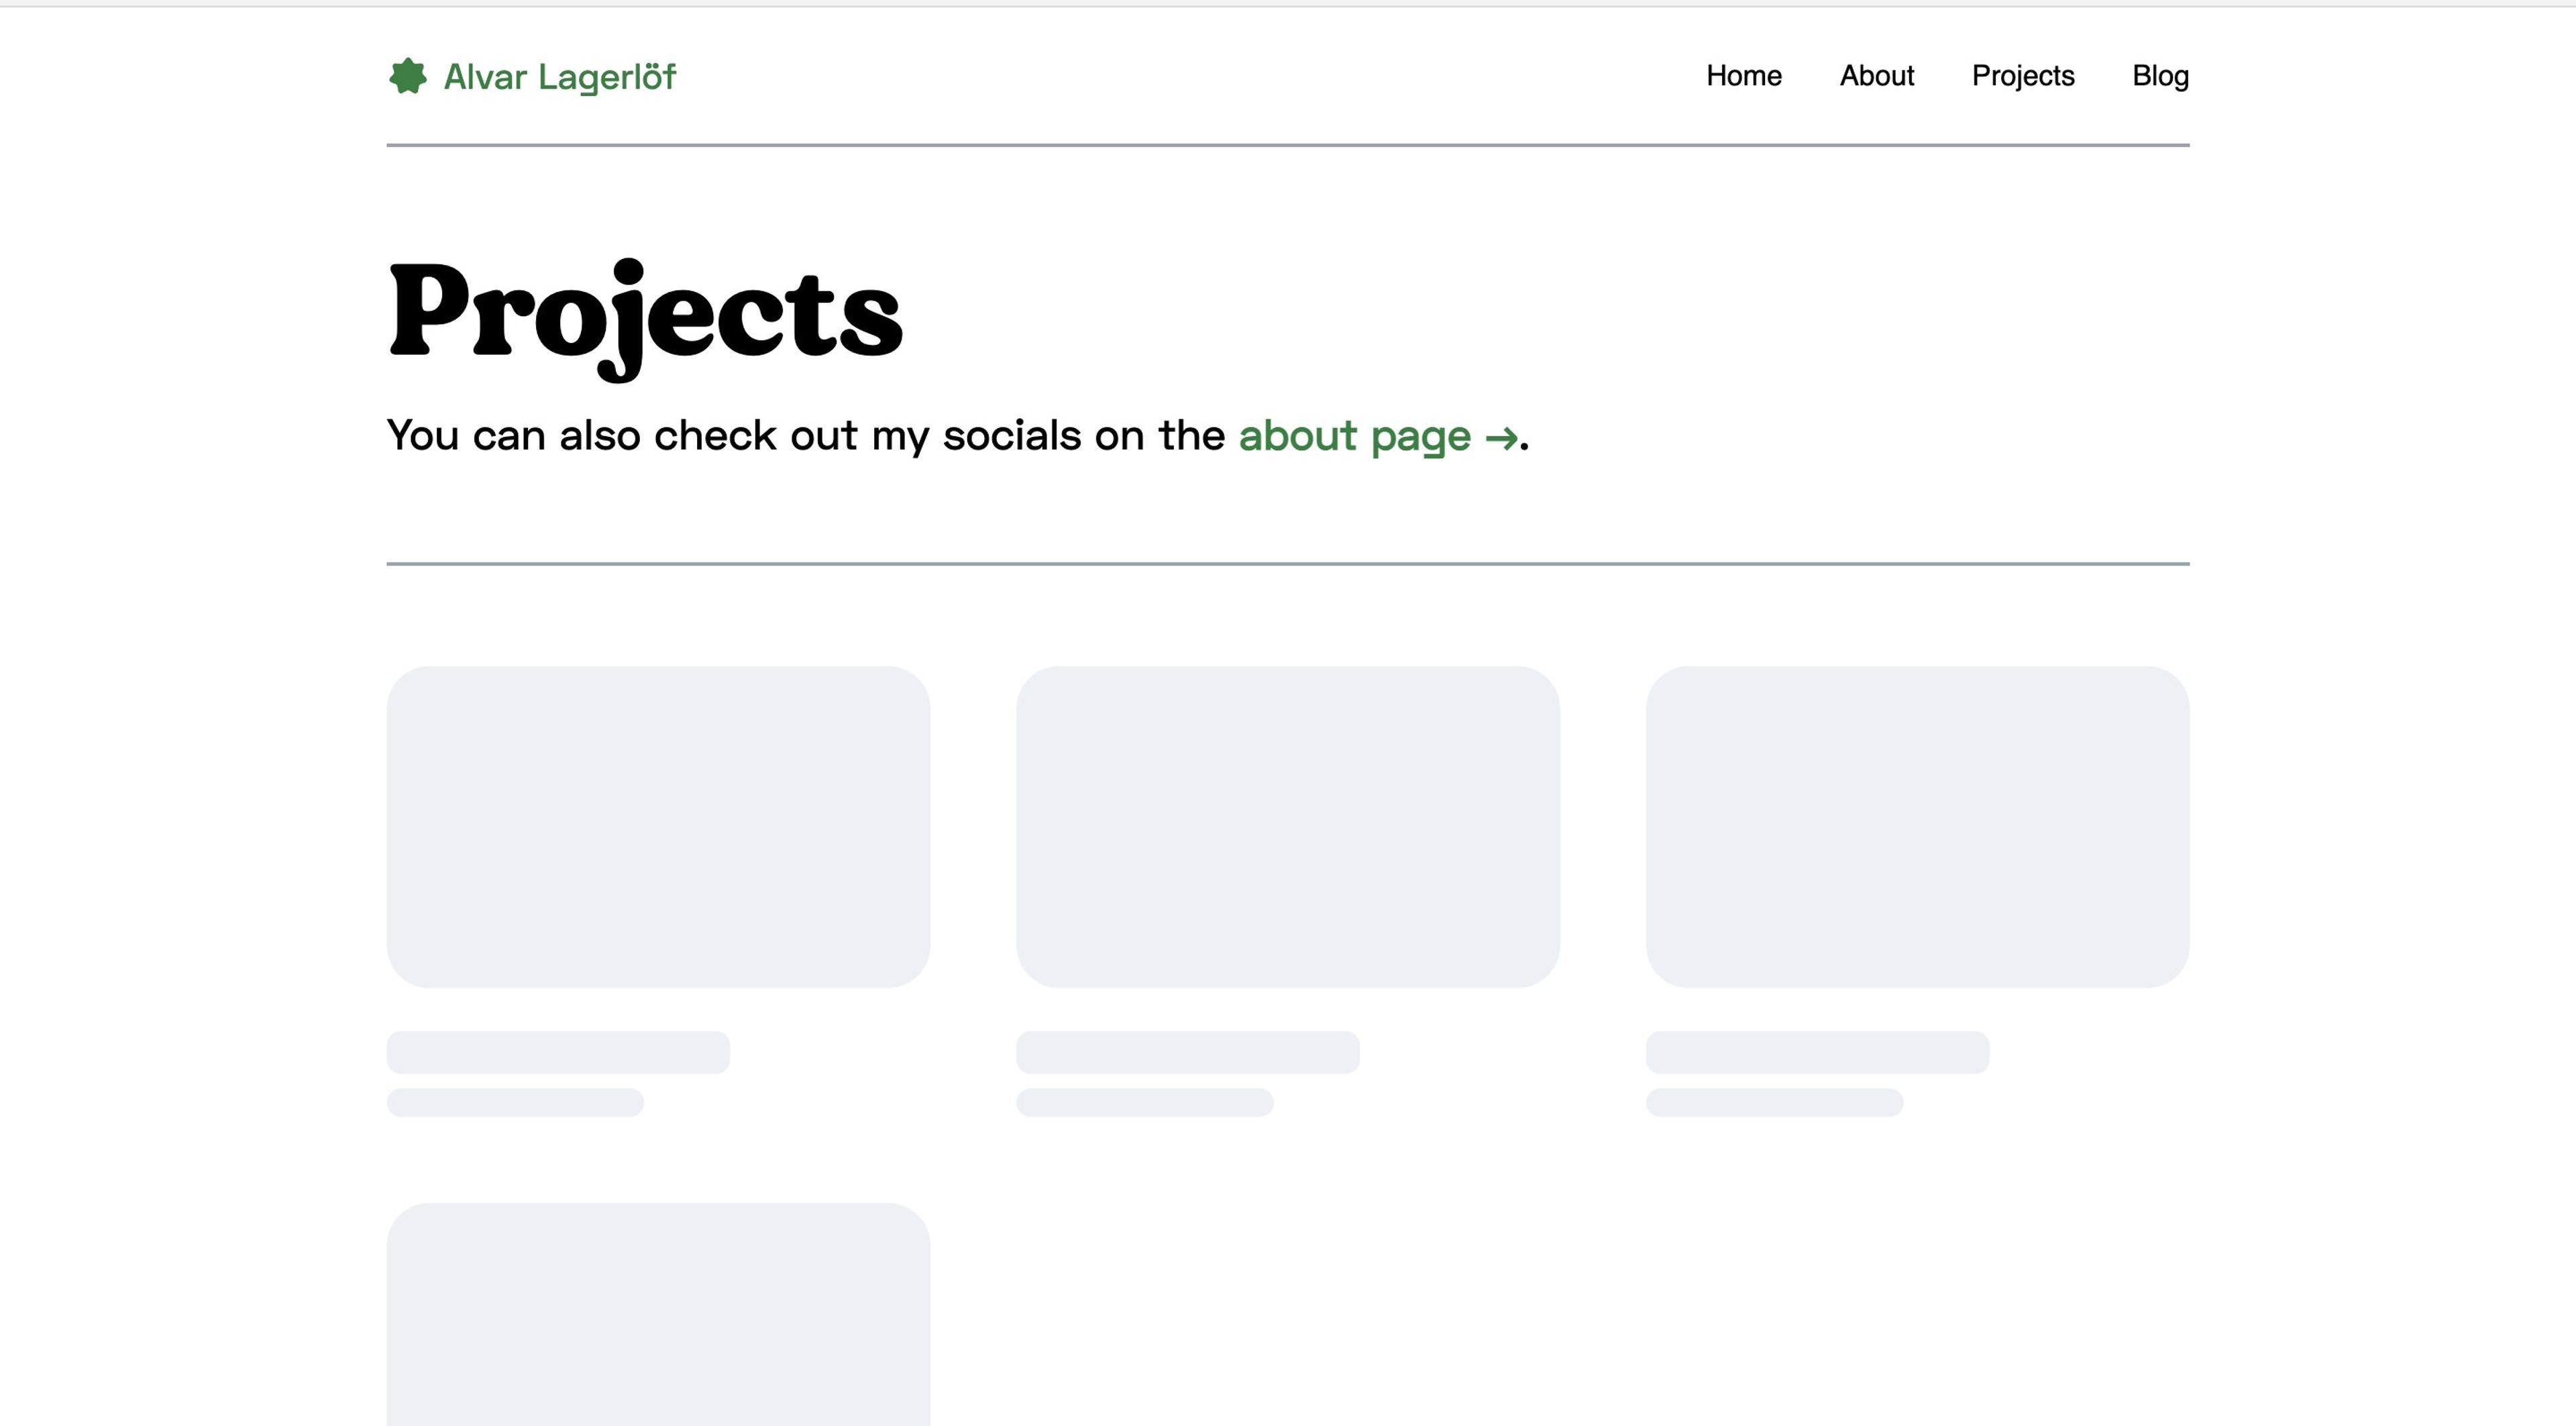 Website alvar.dev, projects page. A grid of projects are loading, indicated by a skeleton UI representing 4 loading projects.